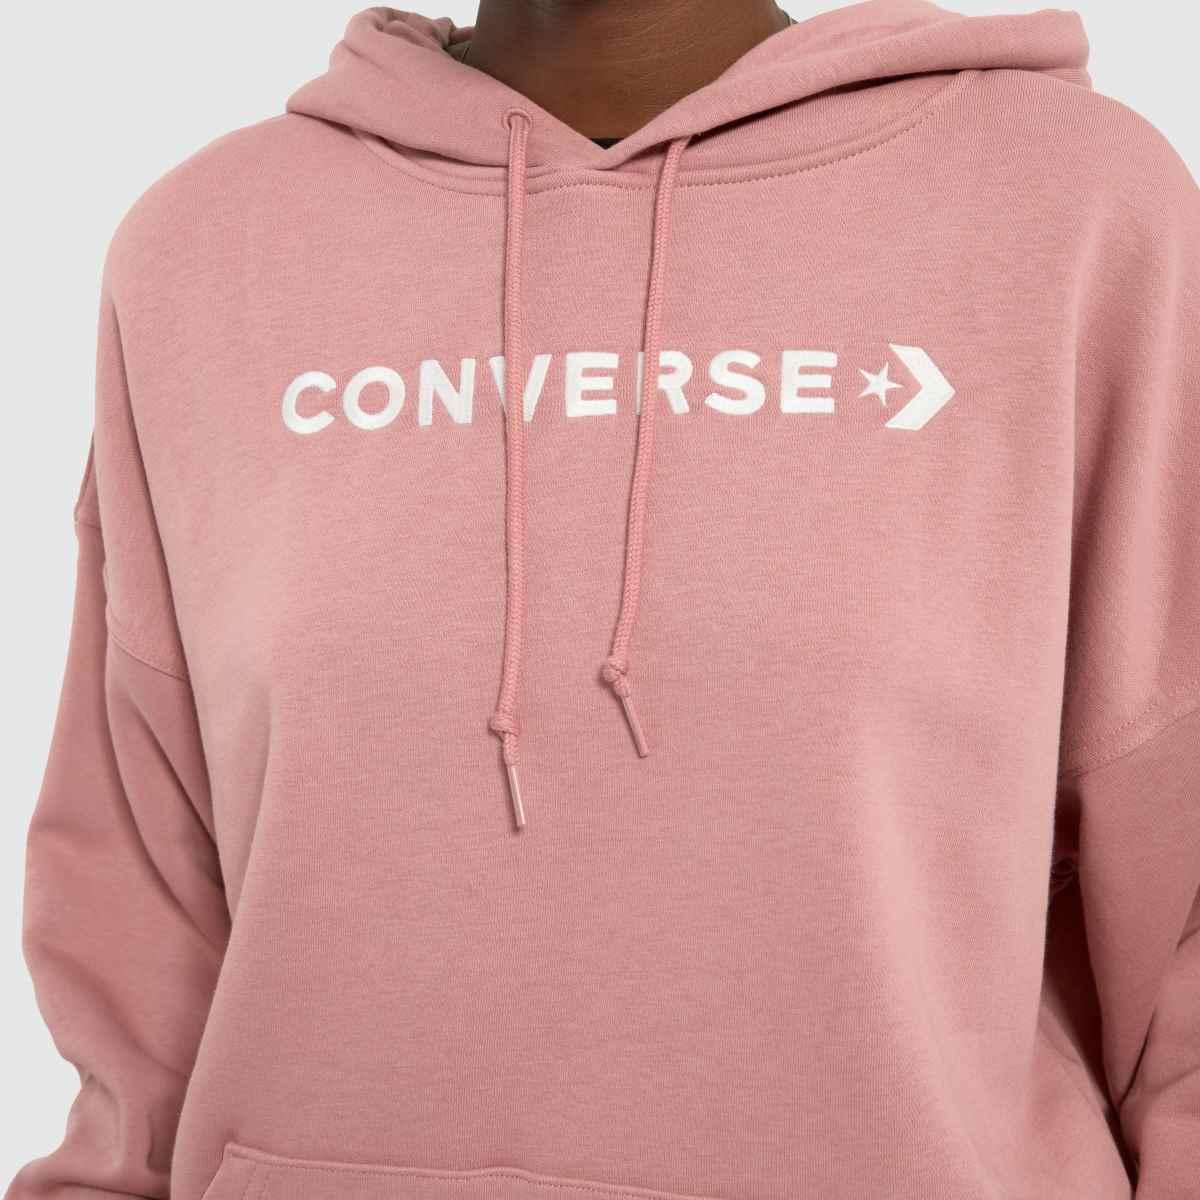 Converse Embroidered Fleece Lyst in | Hoodie UK Pink In